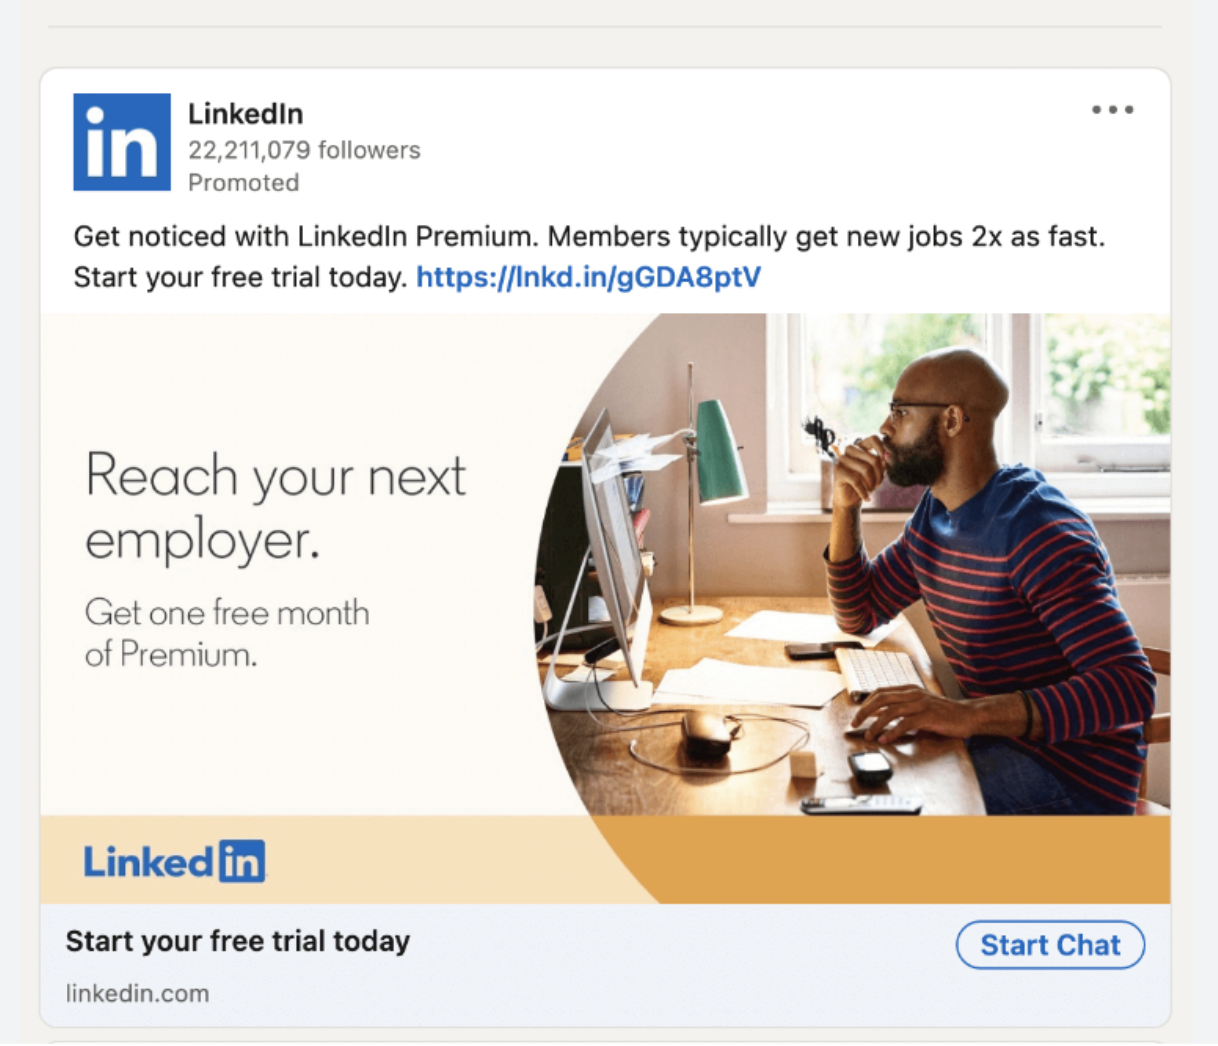 A visually appealing LinkedIn ad crafted by the company to entice users into subscribing to their premium services.